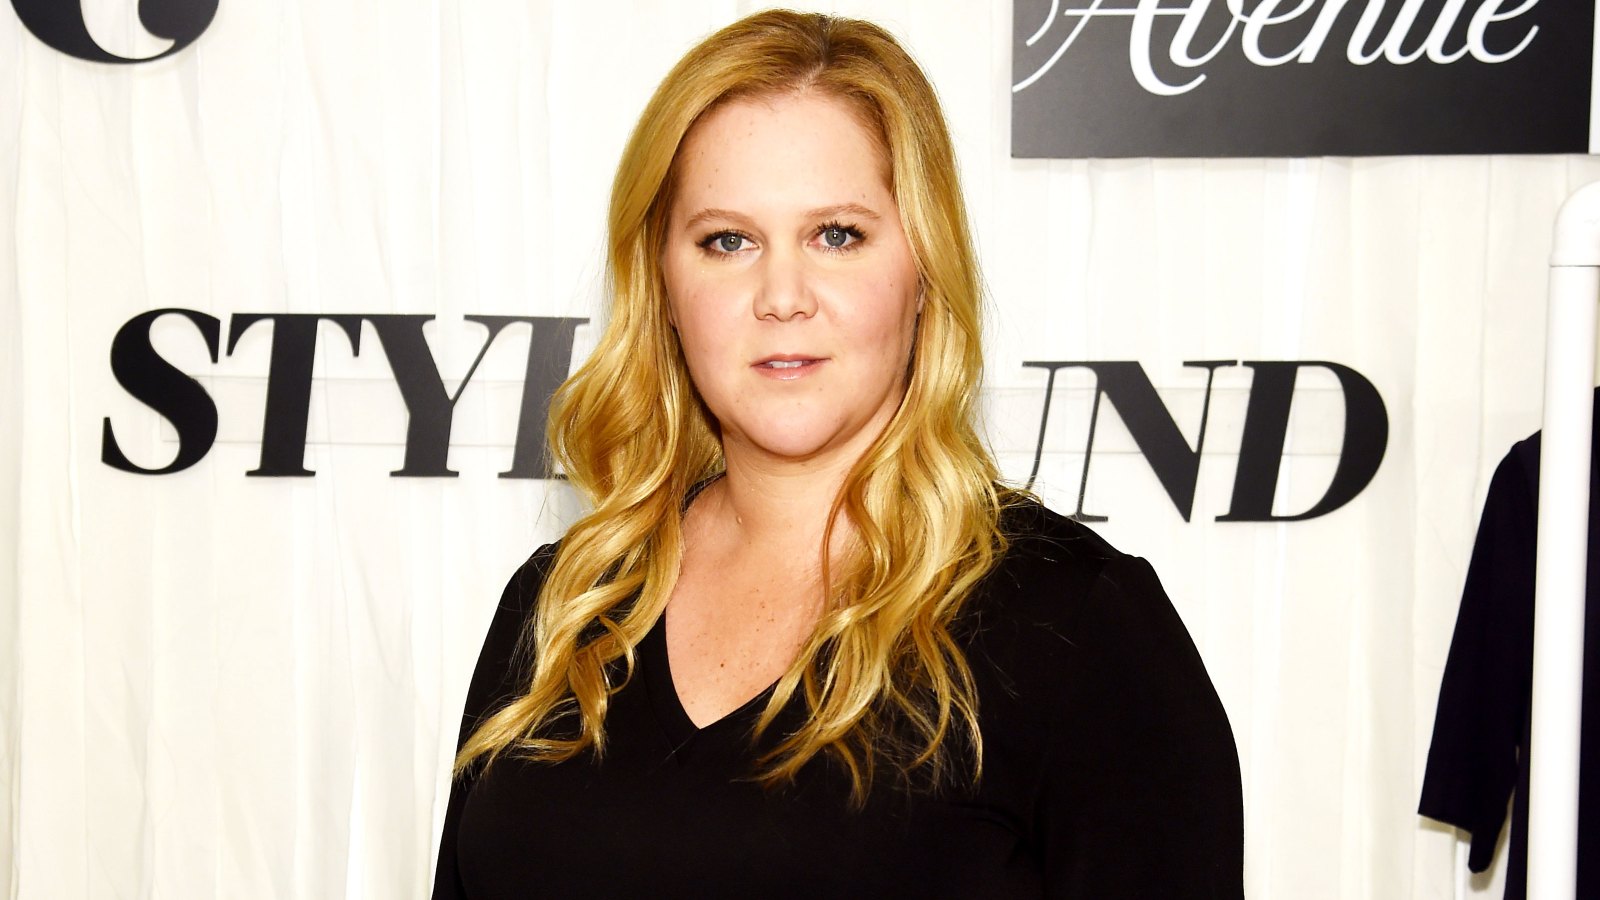 Pregnant Amy Schumer Cancels Comedy Tour Due to Hyperemesis